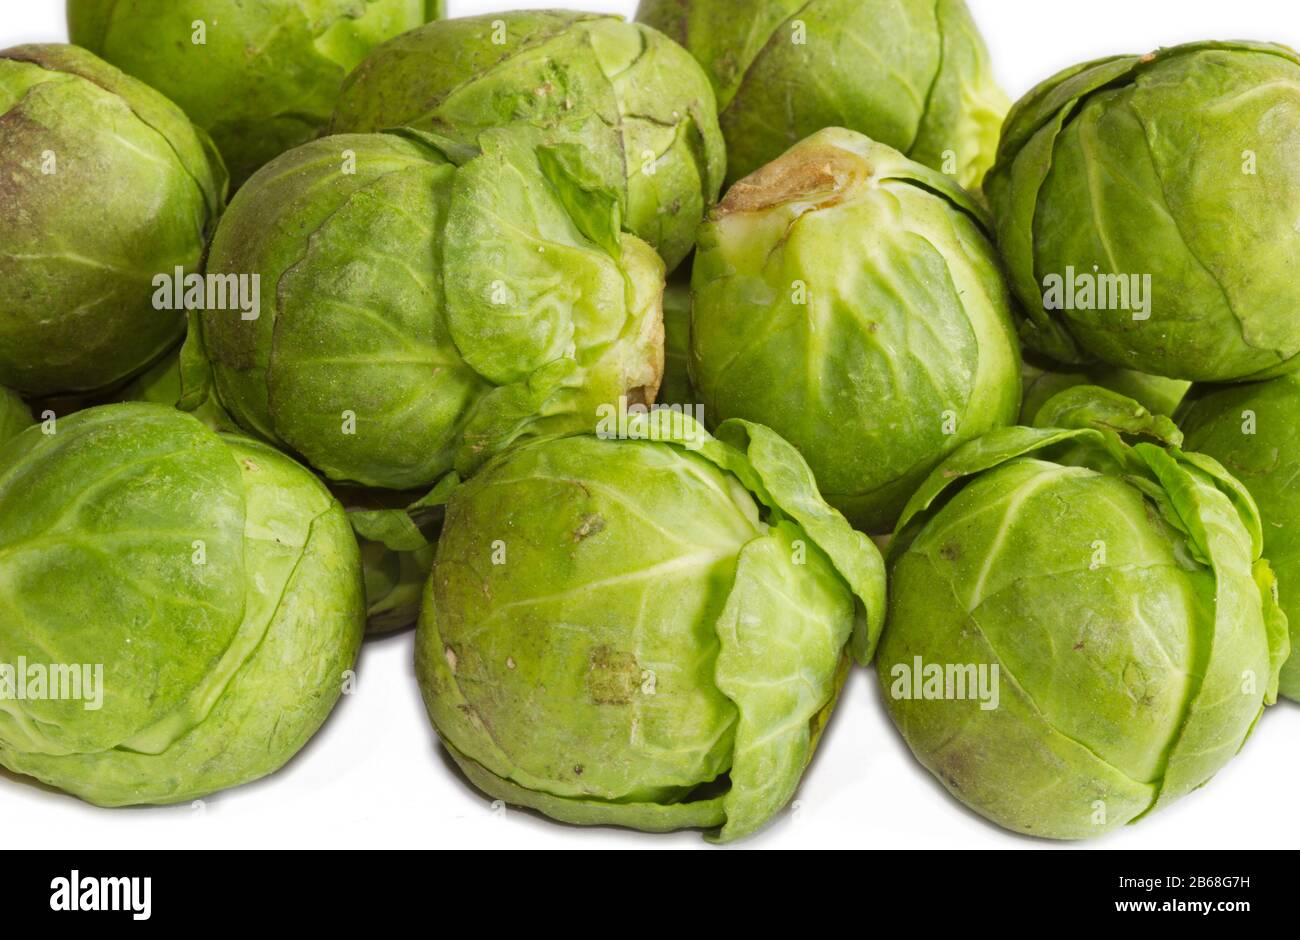 Brussels sprout background, heap of sprouts Stock Photo